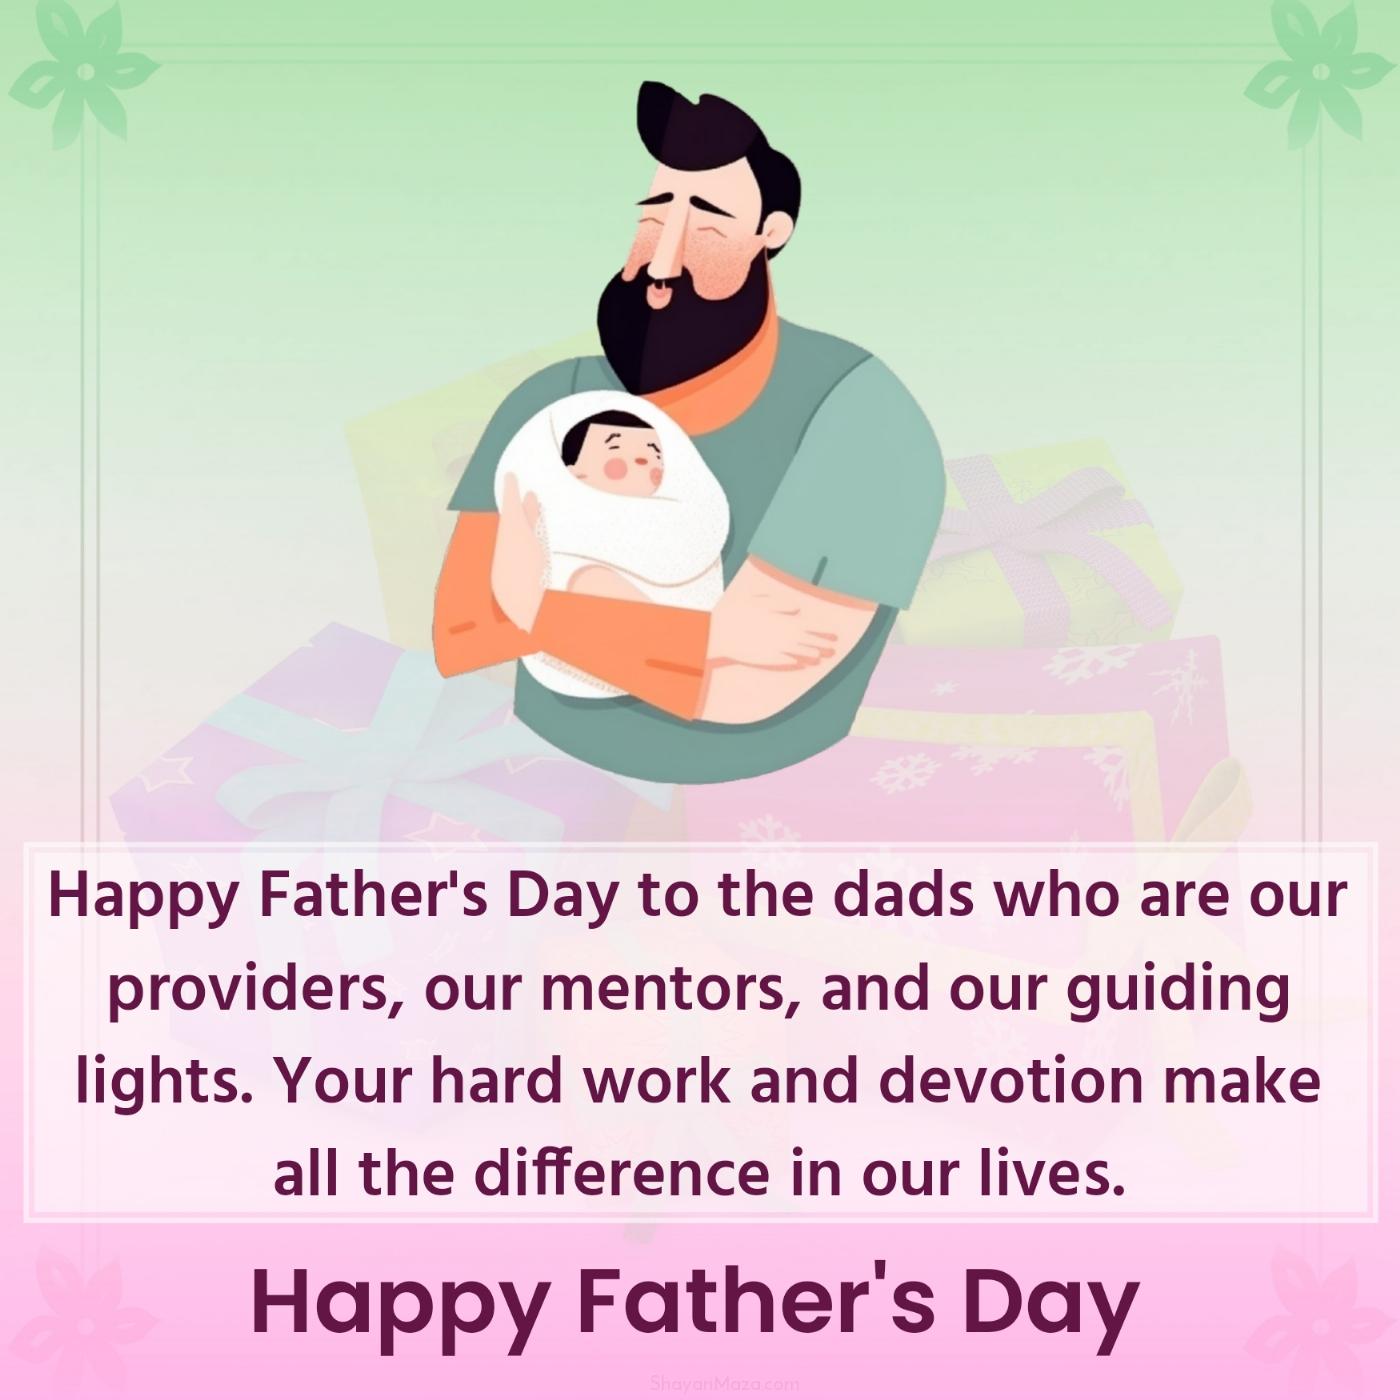 Happy Father's Day to the dads who are our providers our mentors